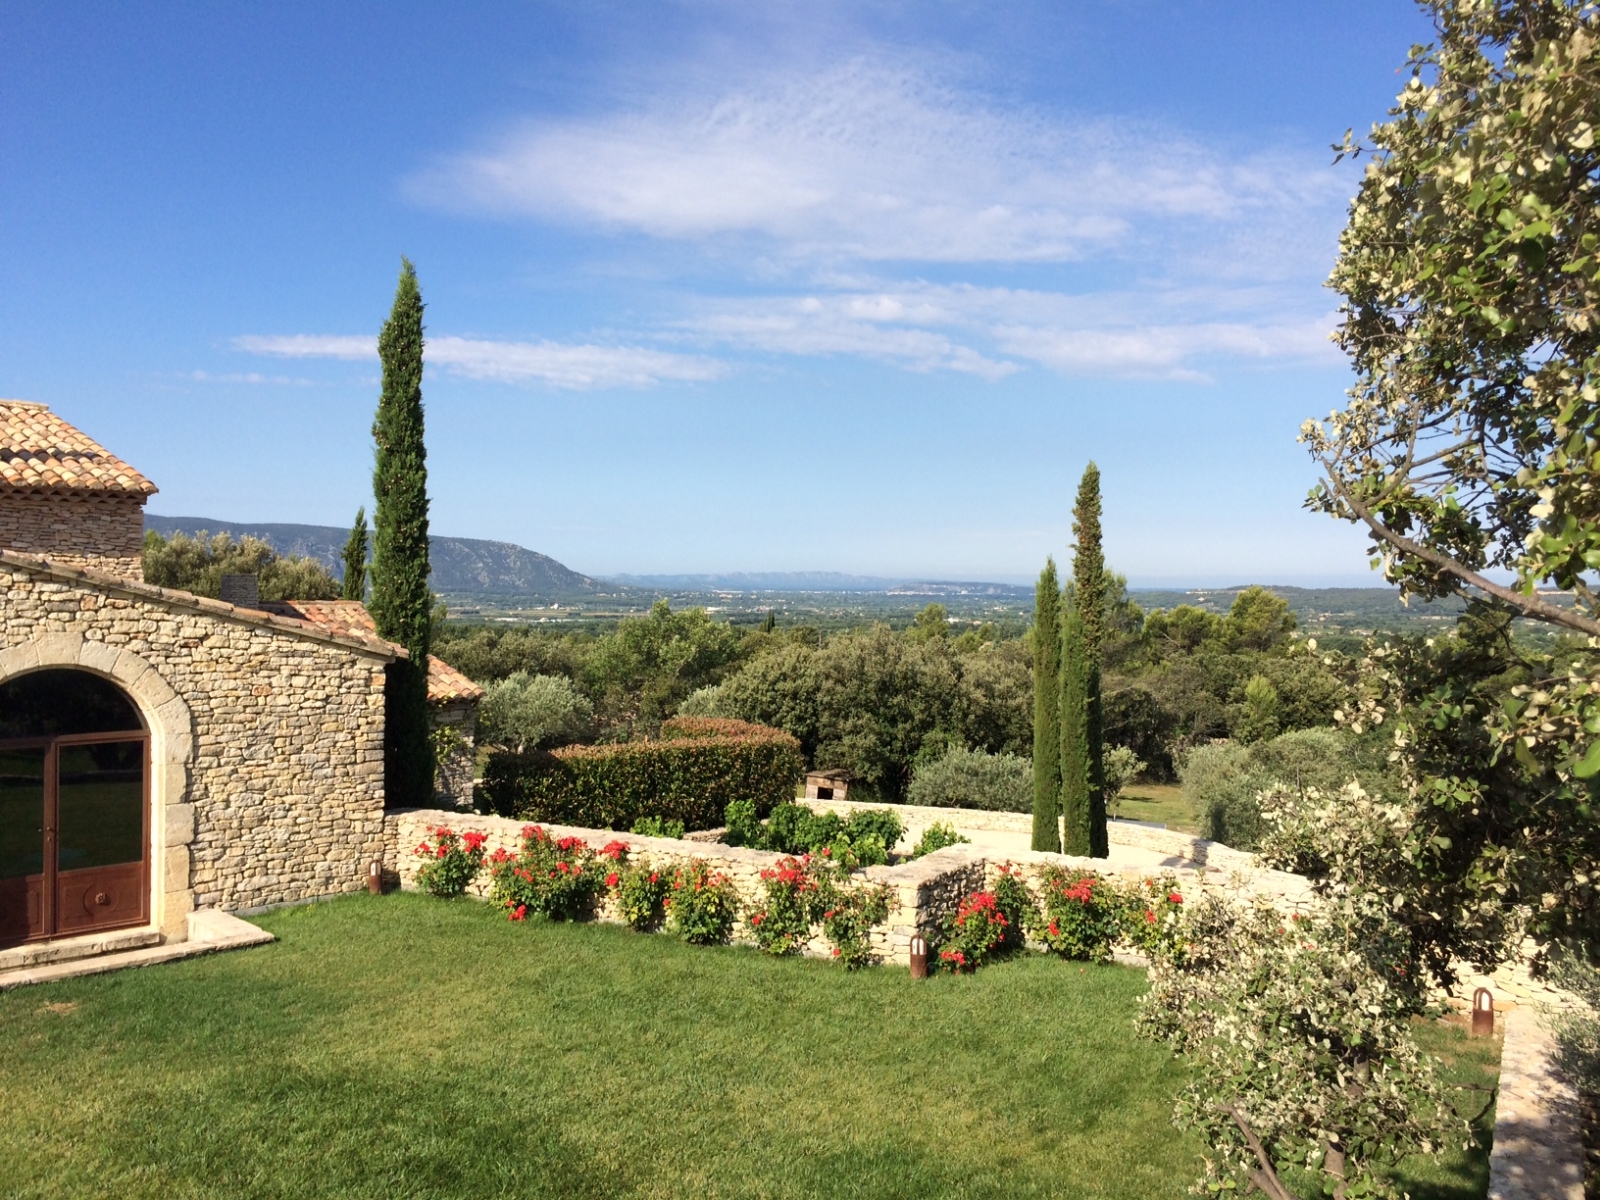 Garden with flowers, trees and countryside view at Le Clos in Provence, France